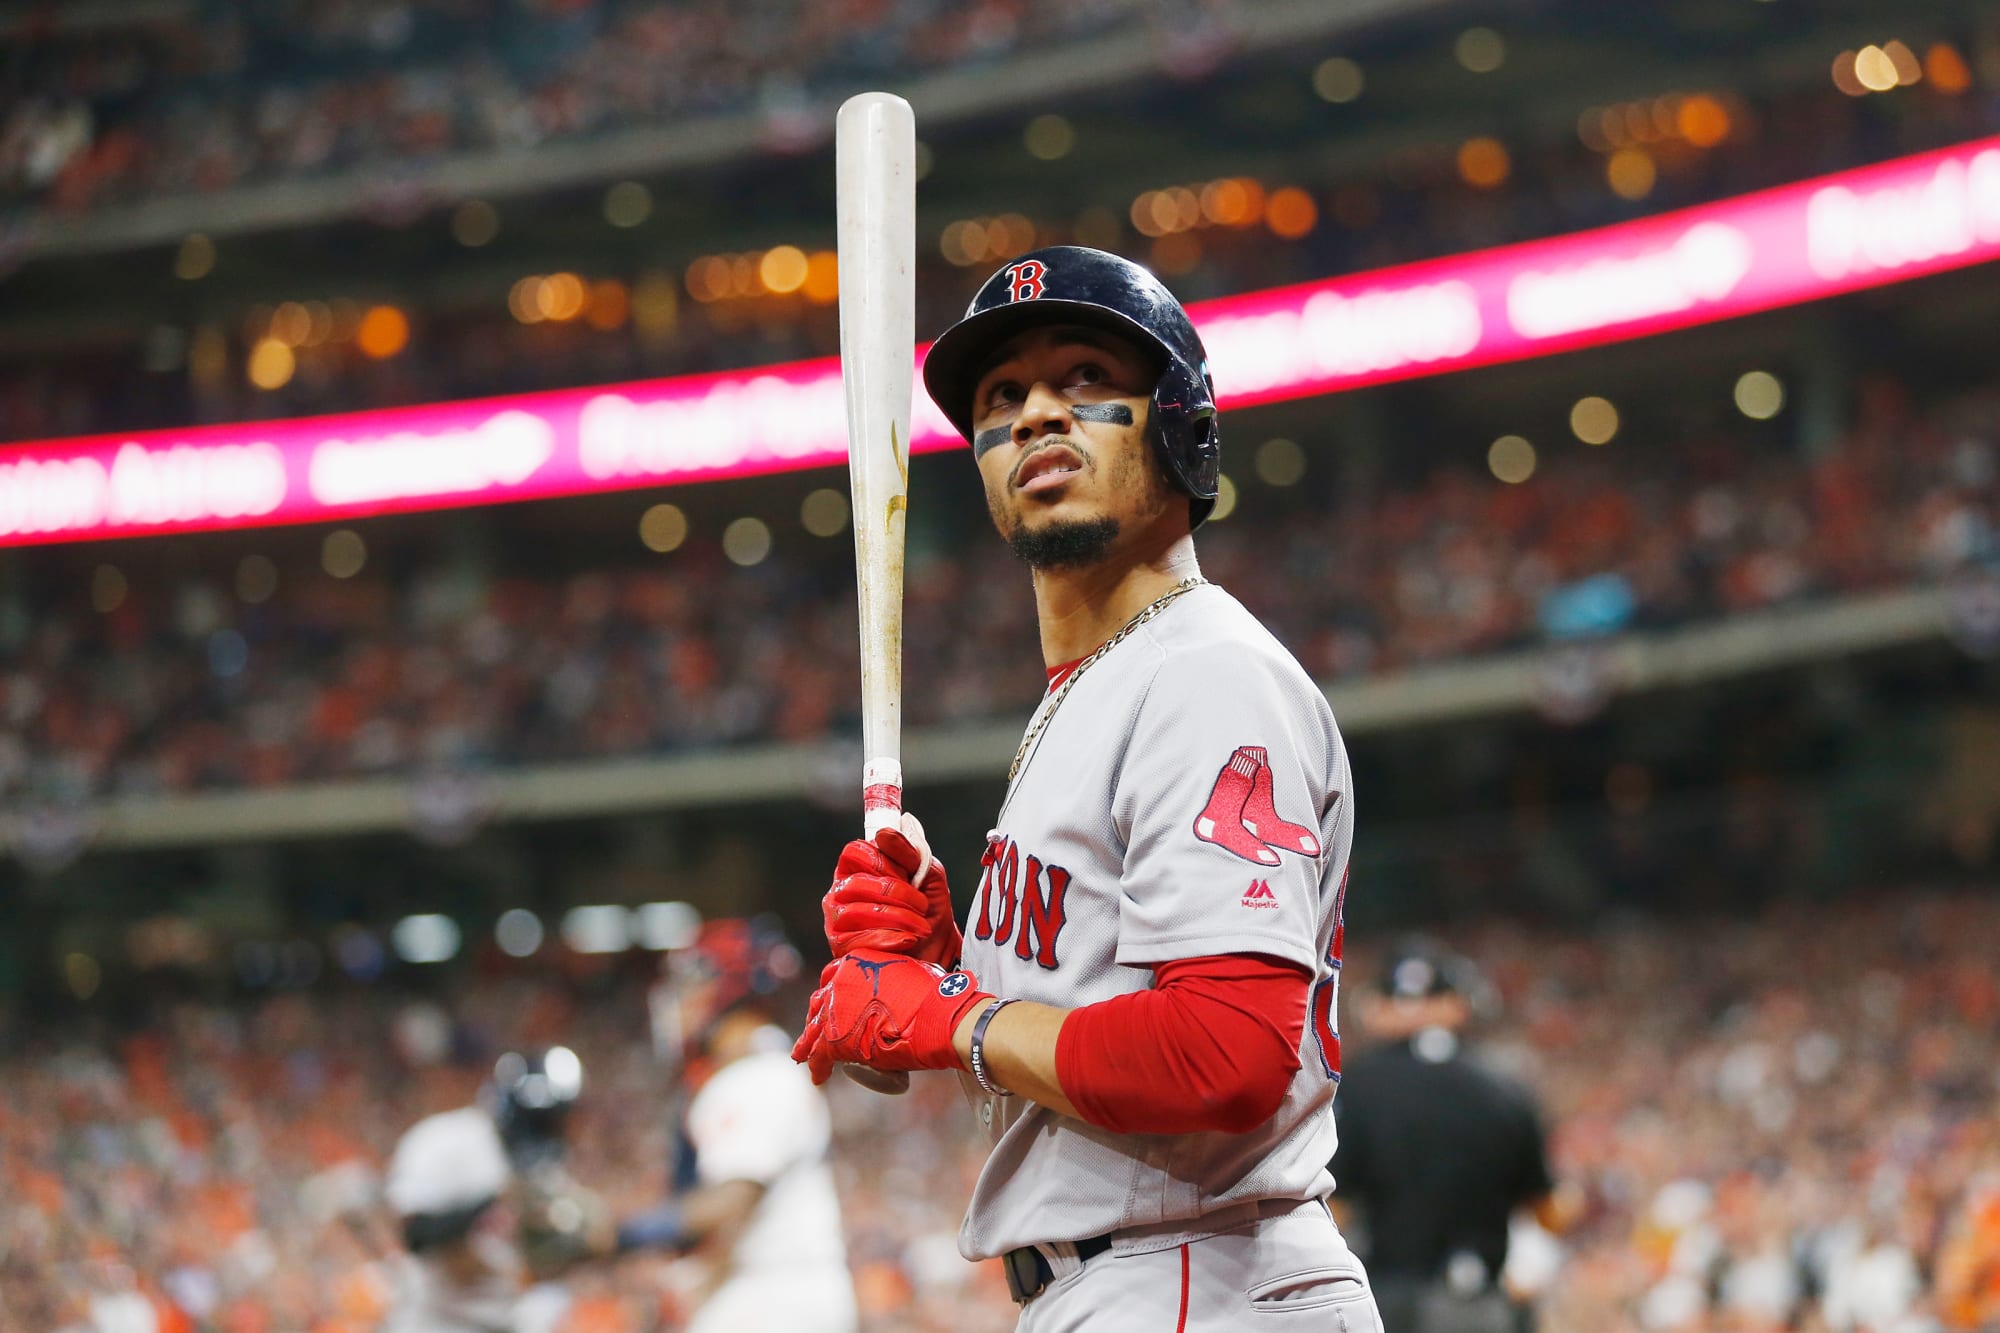 Red Sox outfielder Mookie Betts is on track to be historically great